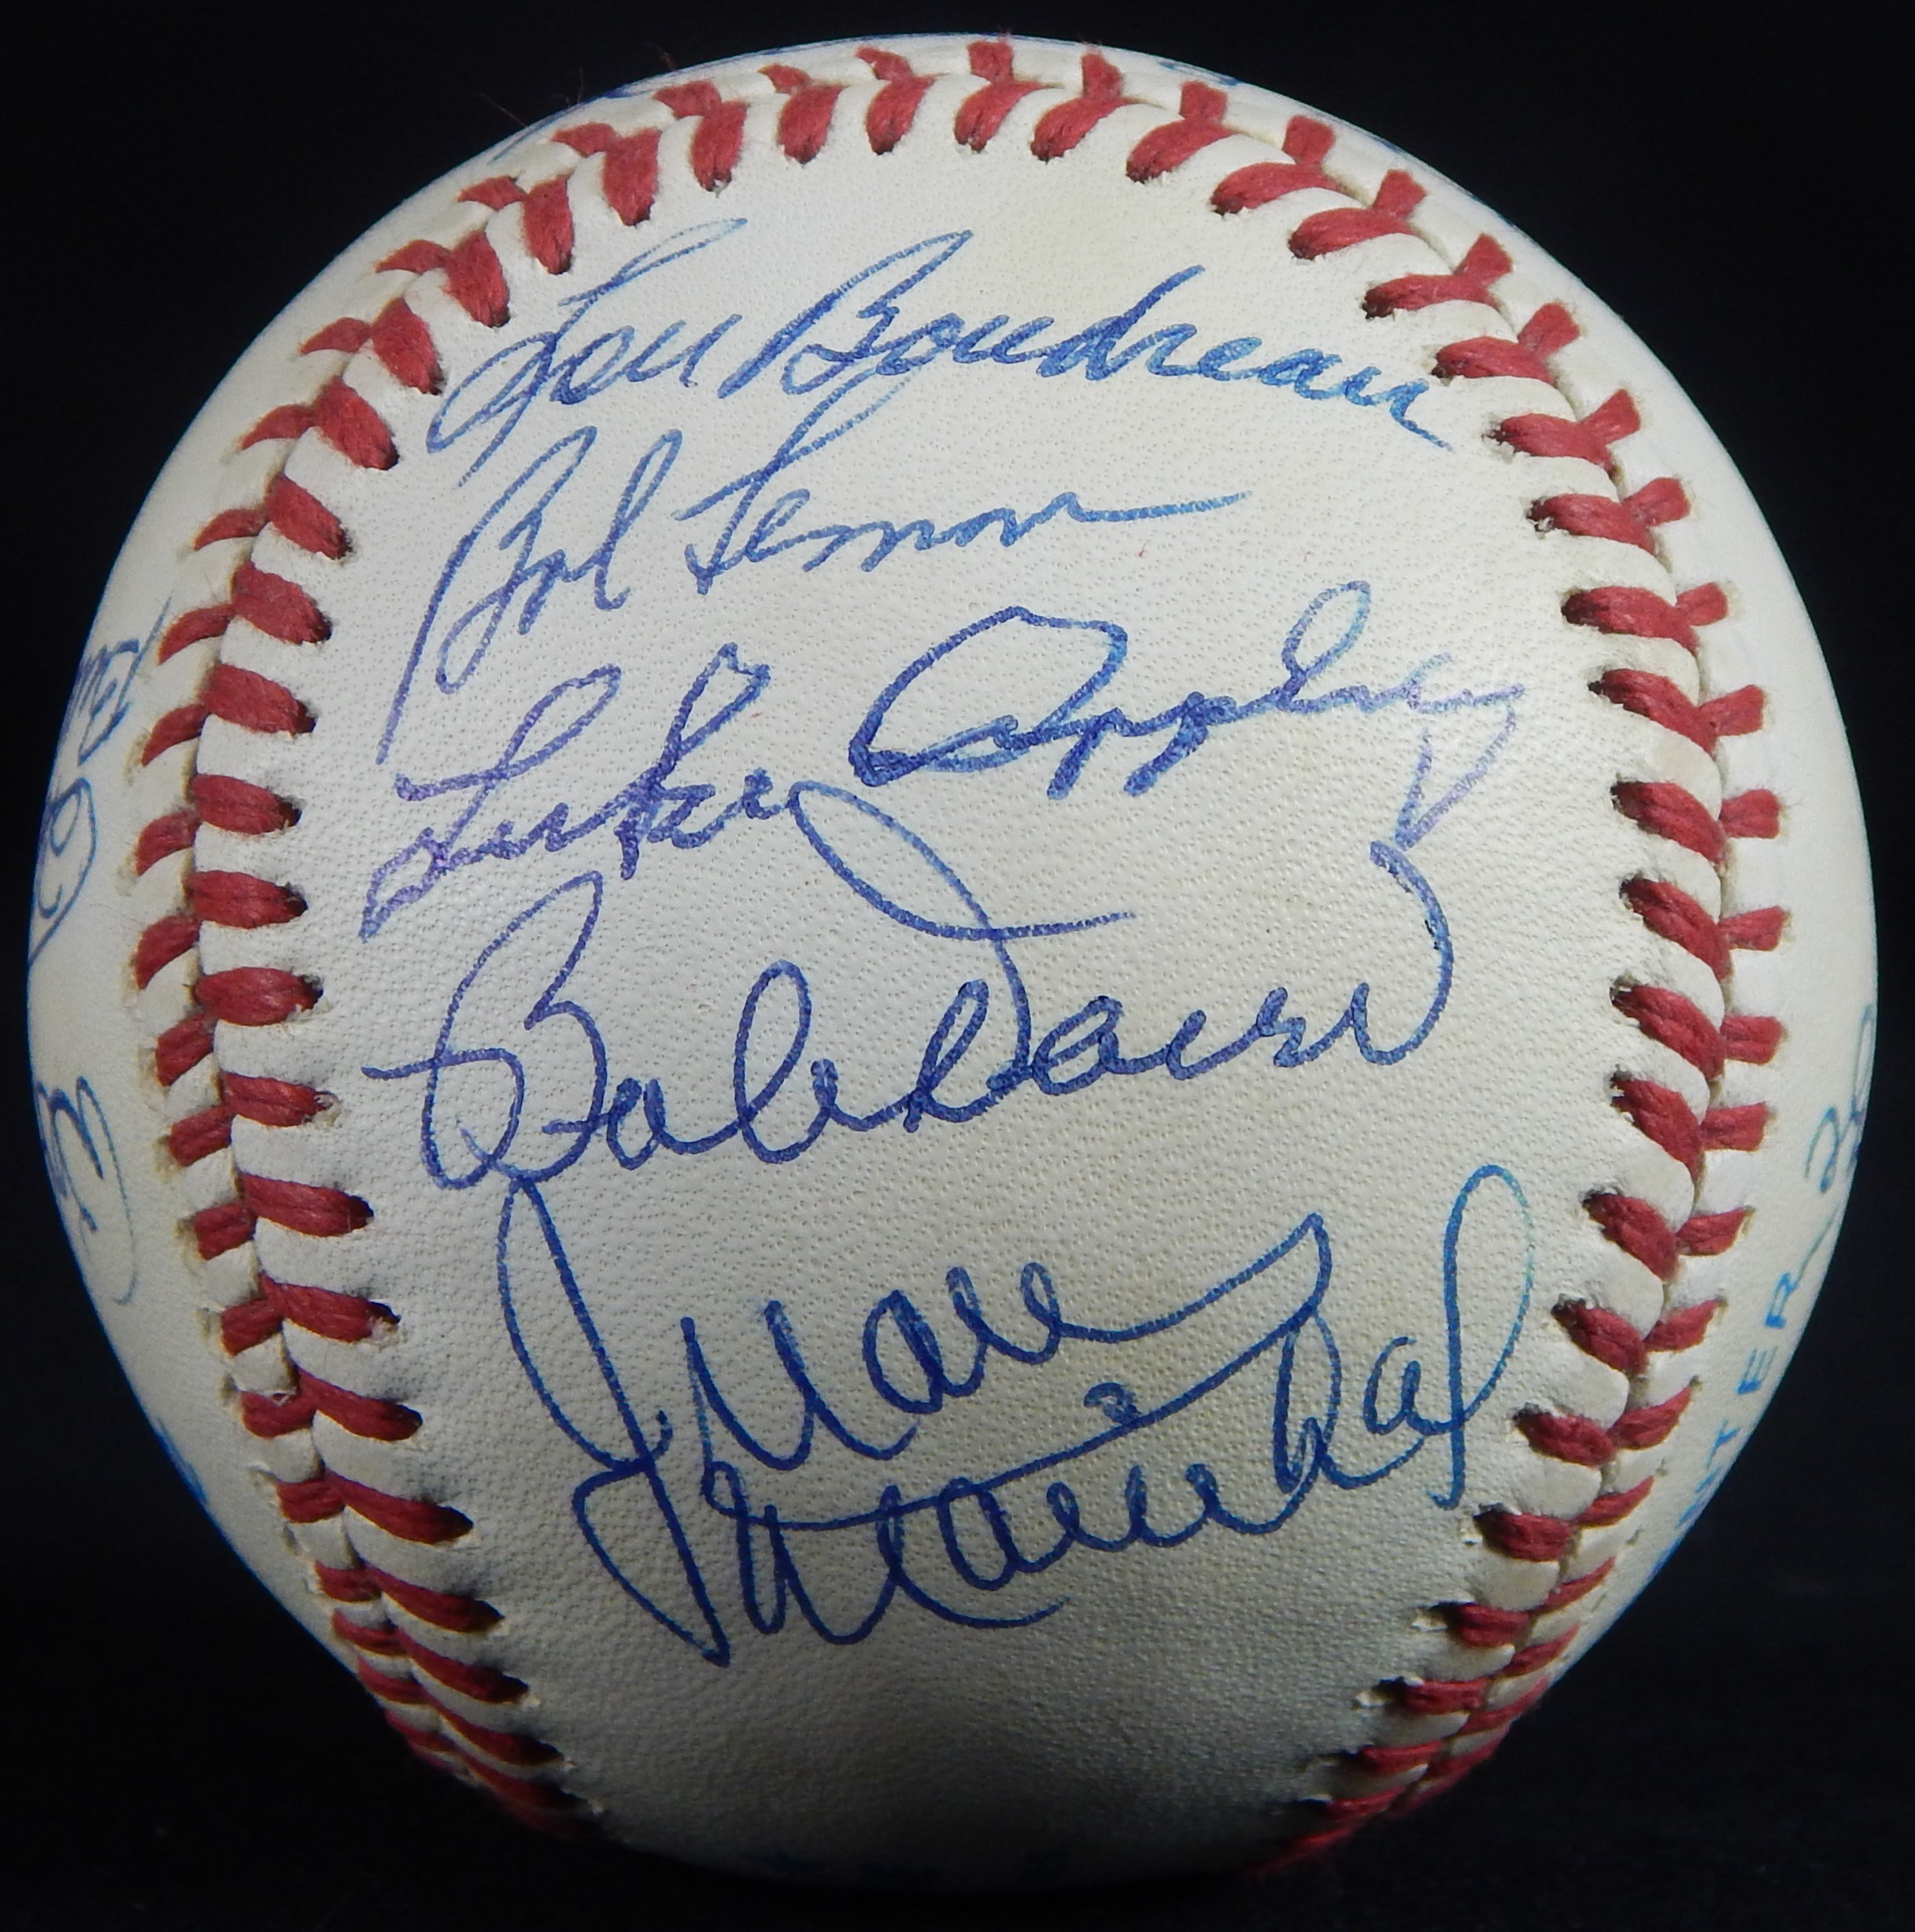 - Hall Of Famers Signed baseball (16 signatures)